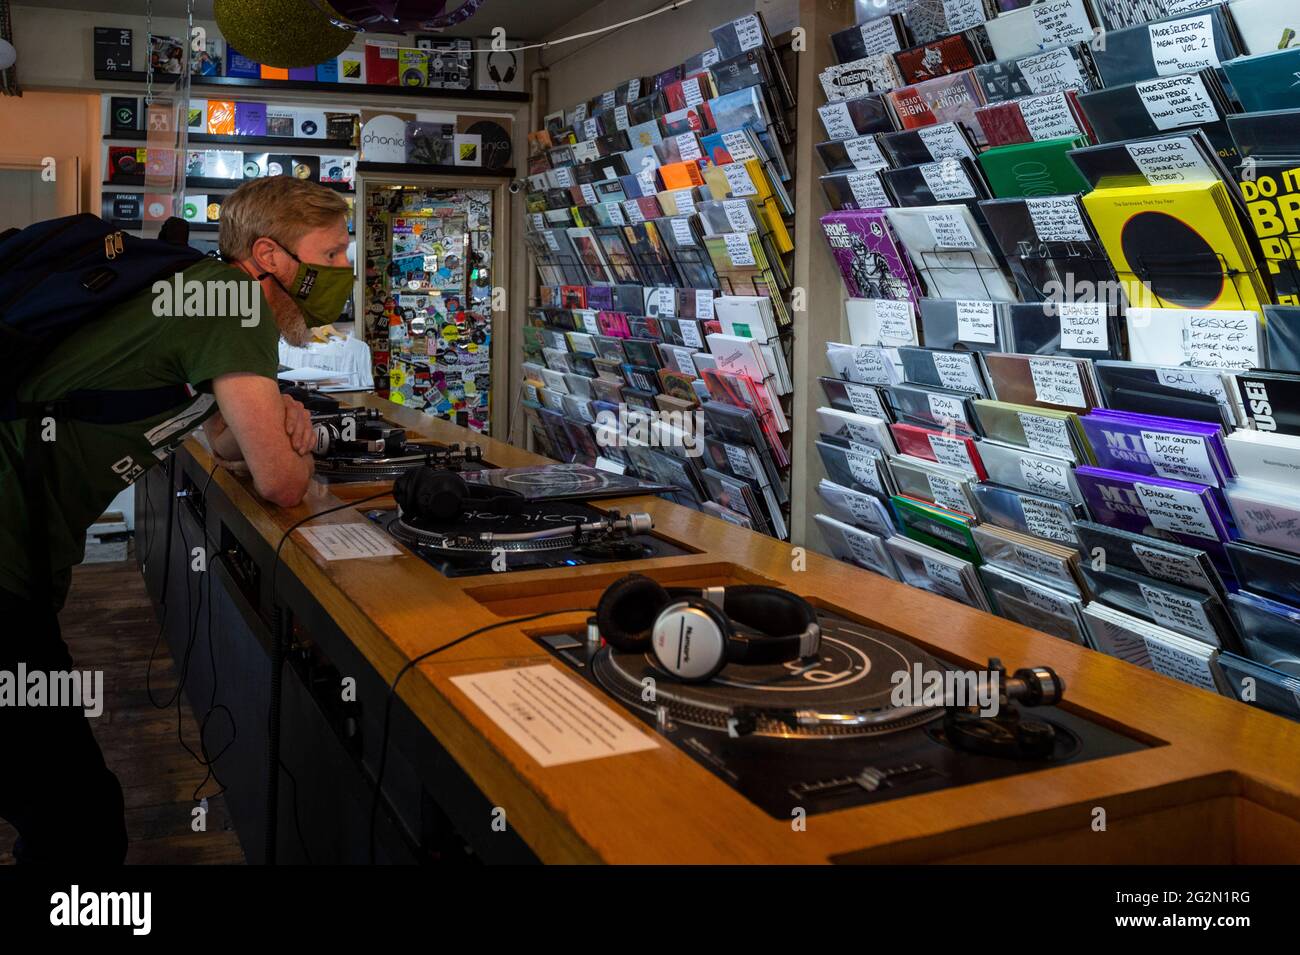 London Uk 12 June 21 A Customer In Phonica Records In Soho On Record Store Day Where Independent Record Shops Worldwide Celebrate Music Including Special Vinyl Releases Made Exclusively For The Day